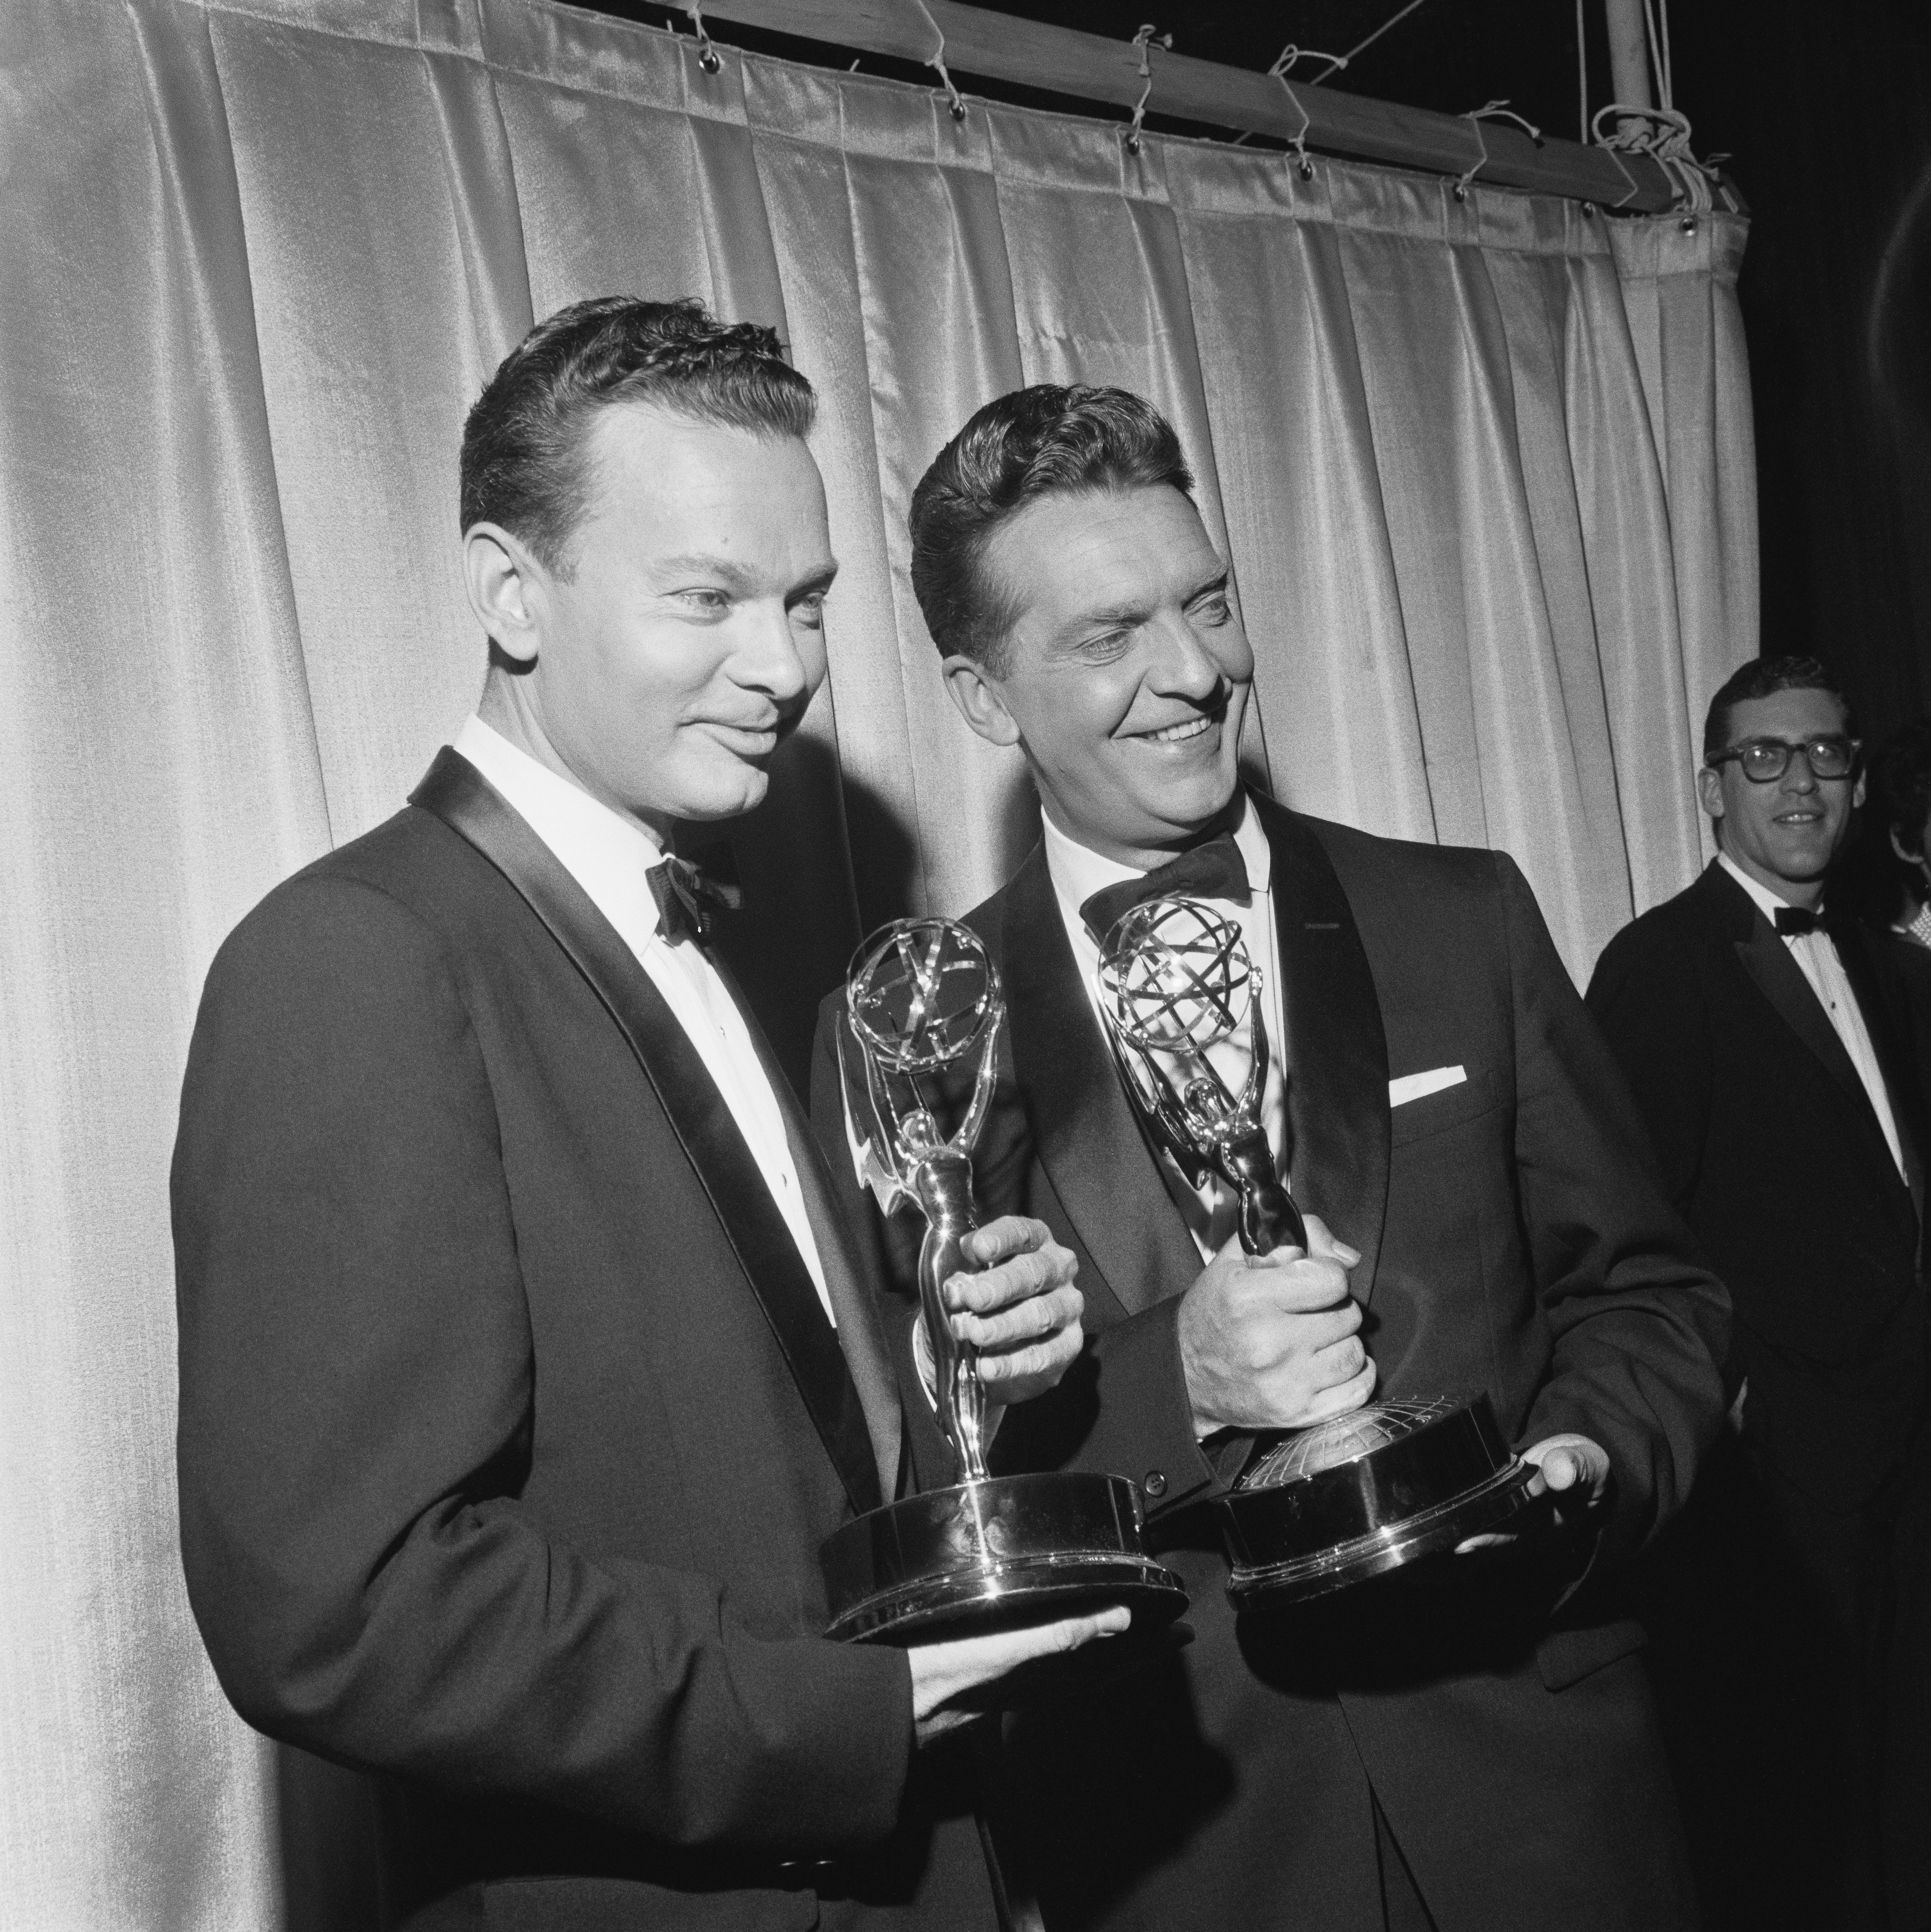 Anchors with awards for The Huntley-Brinkley Report television show (1956-1970). (Bettmann—Bettmann Archive)